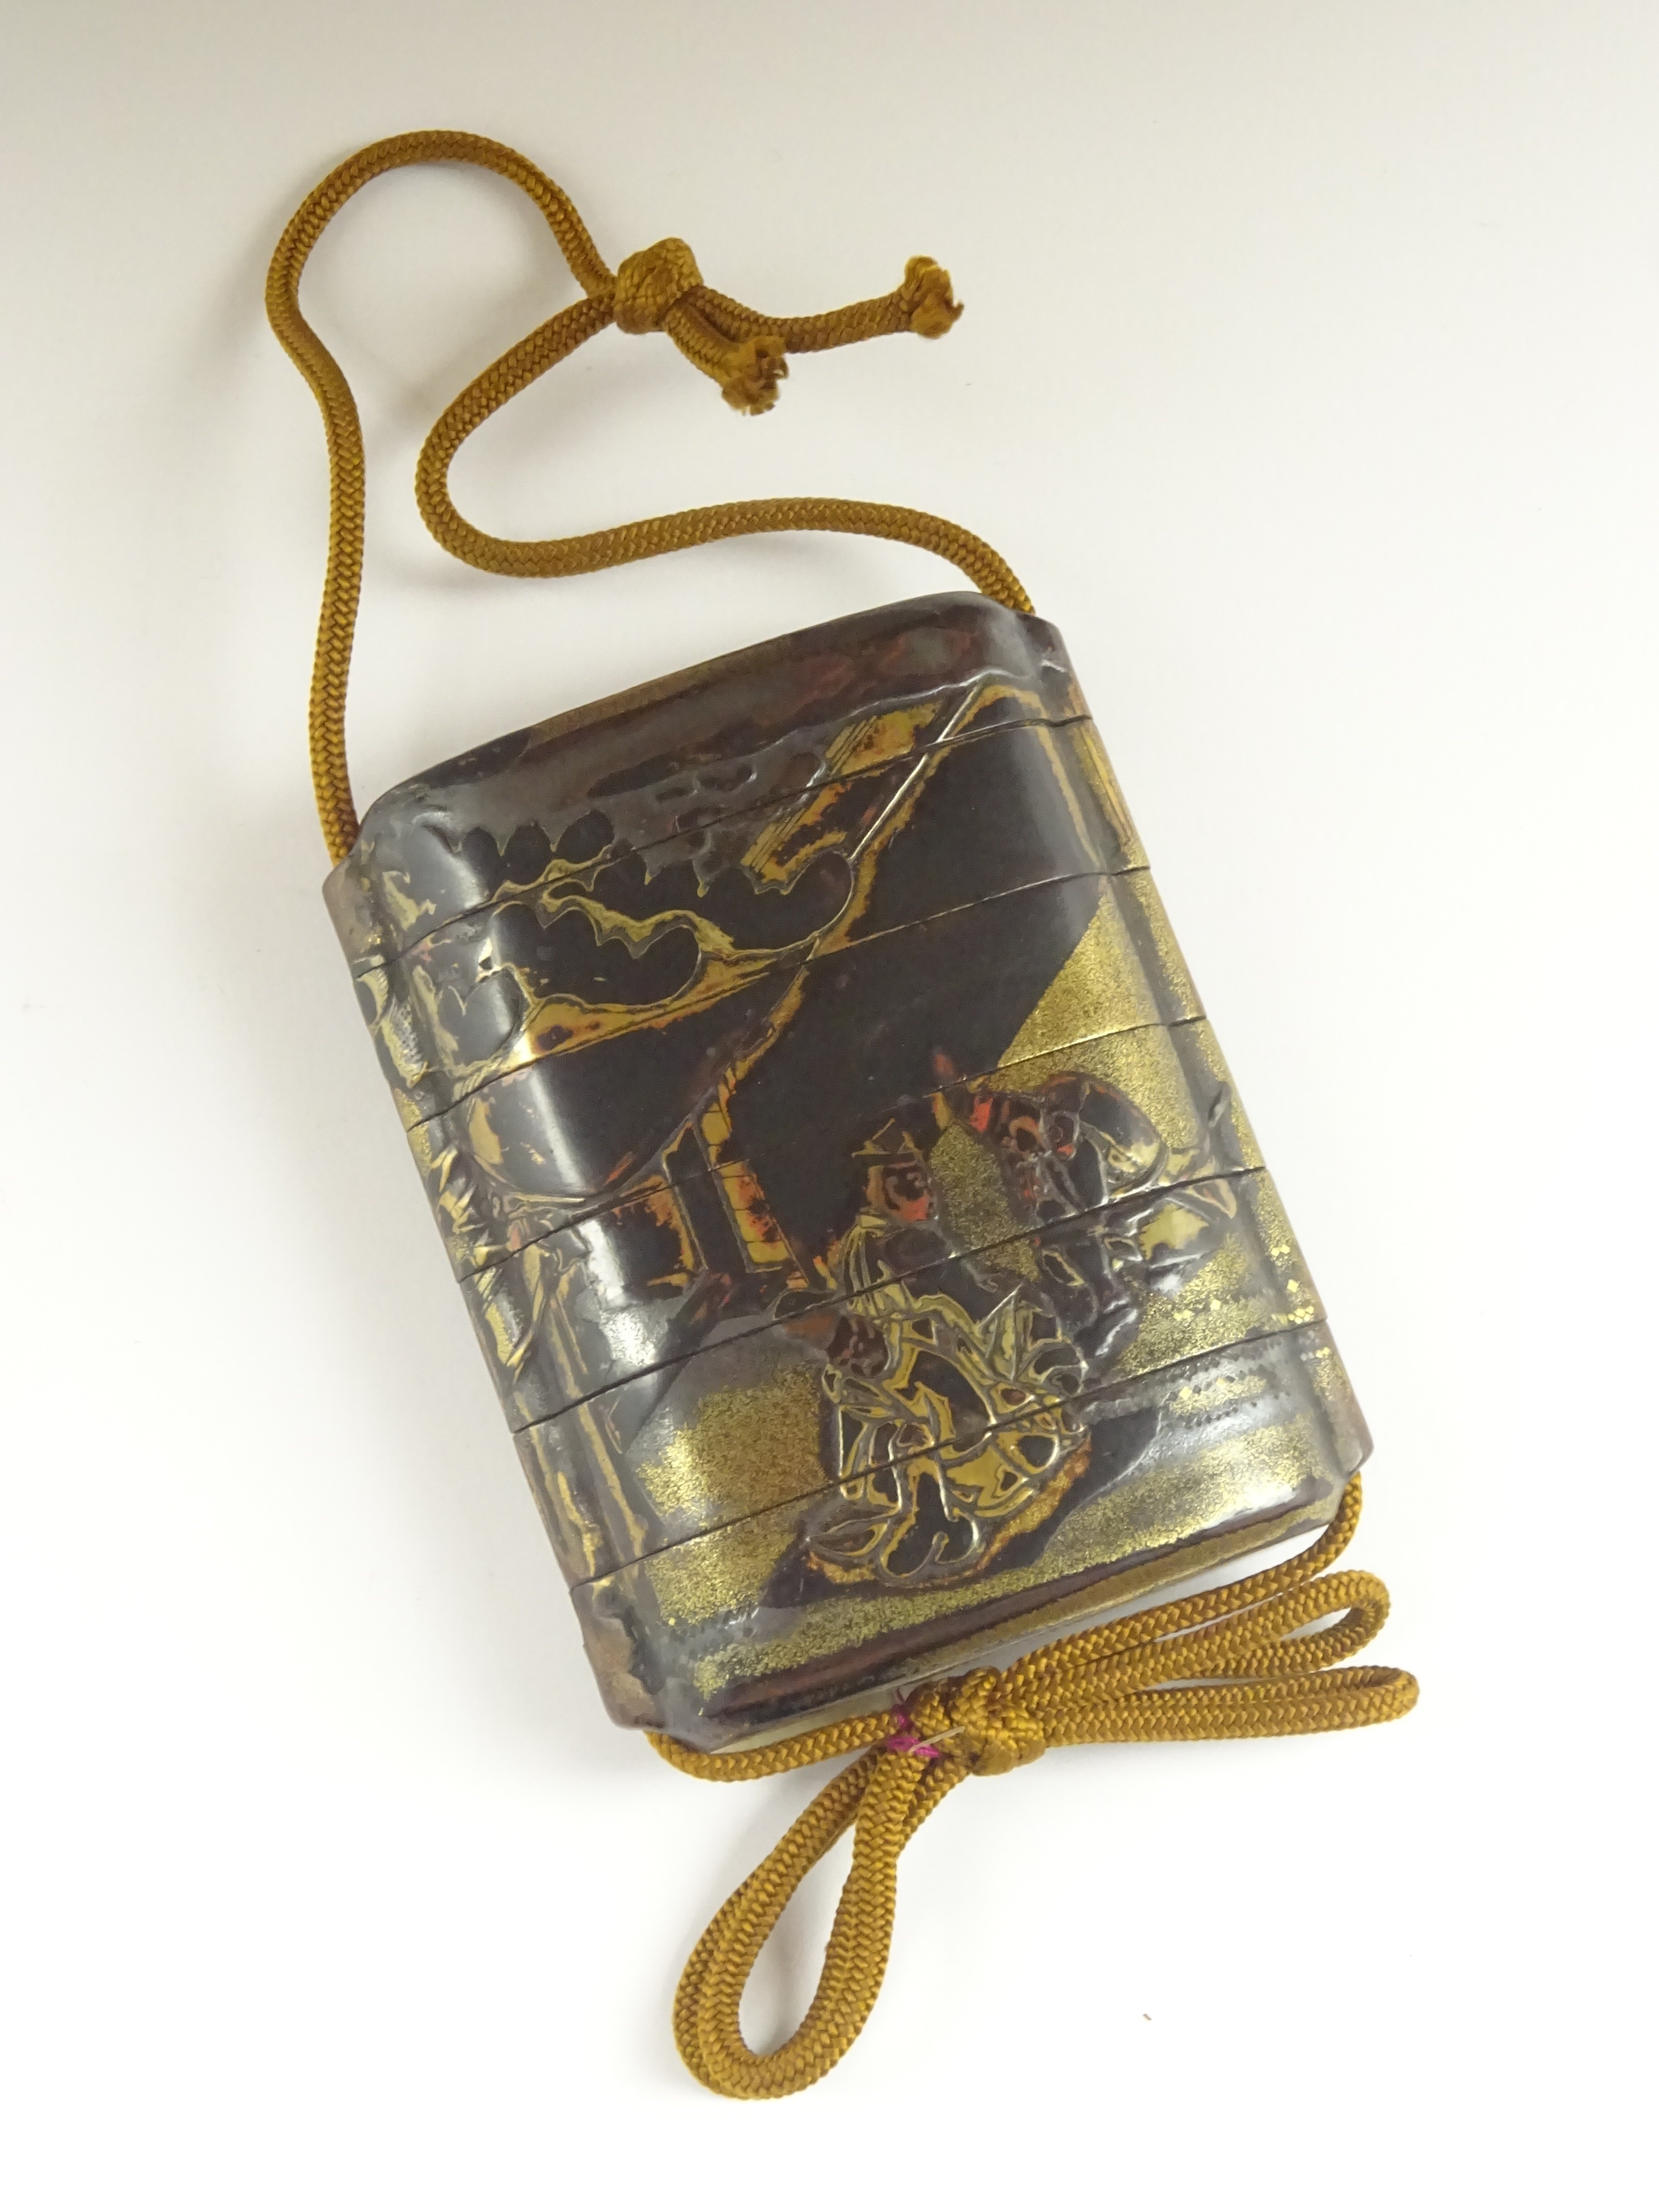 Japanese lacquer five-case Inro Edo period, 18th Century, decorated in red,